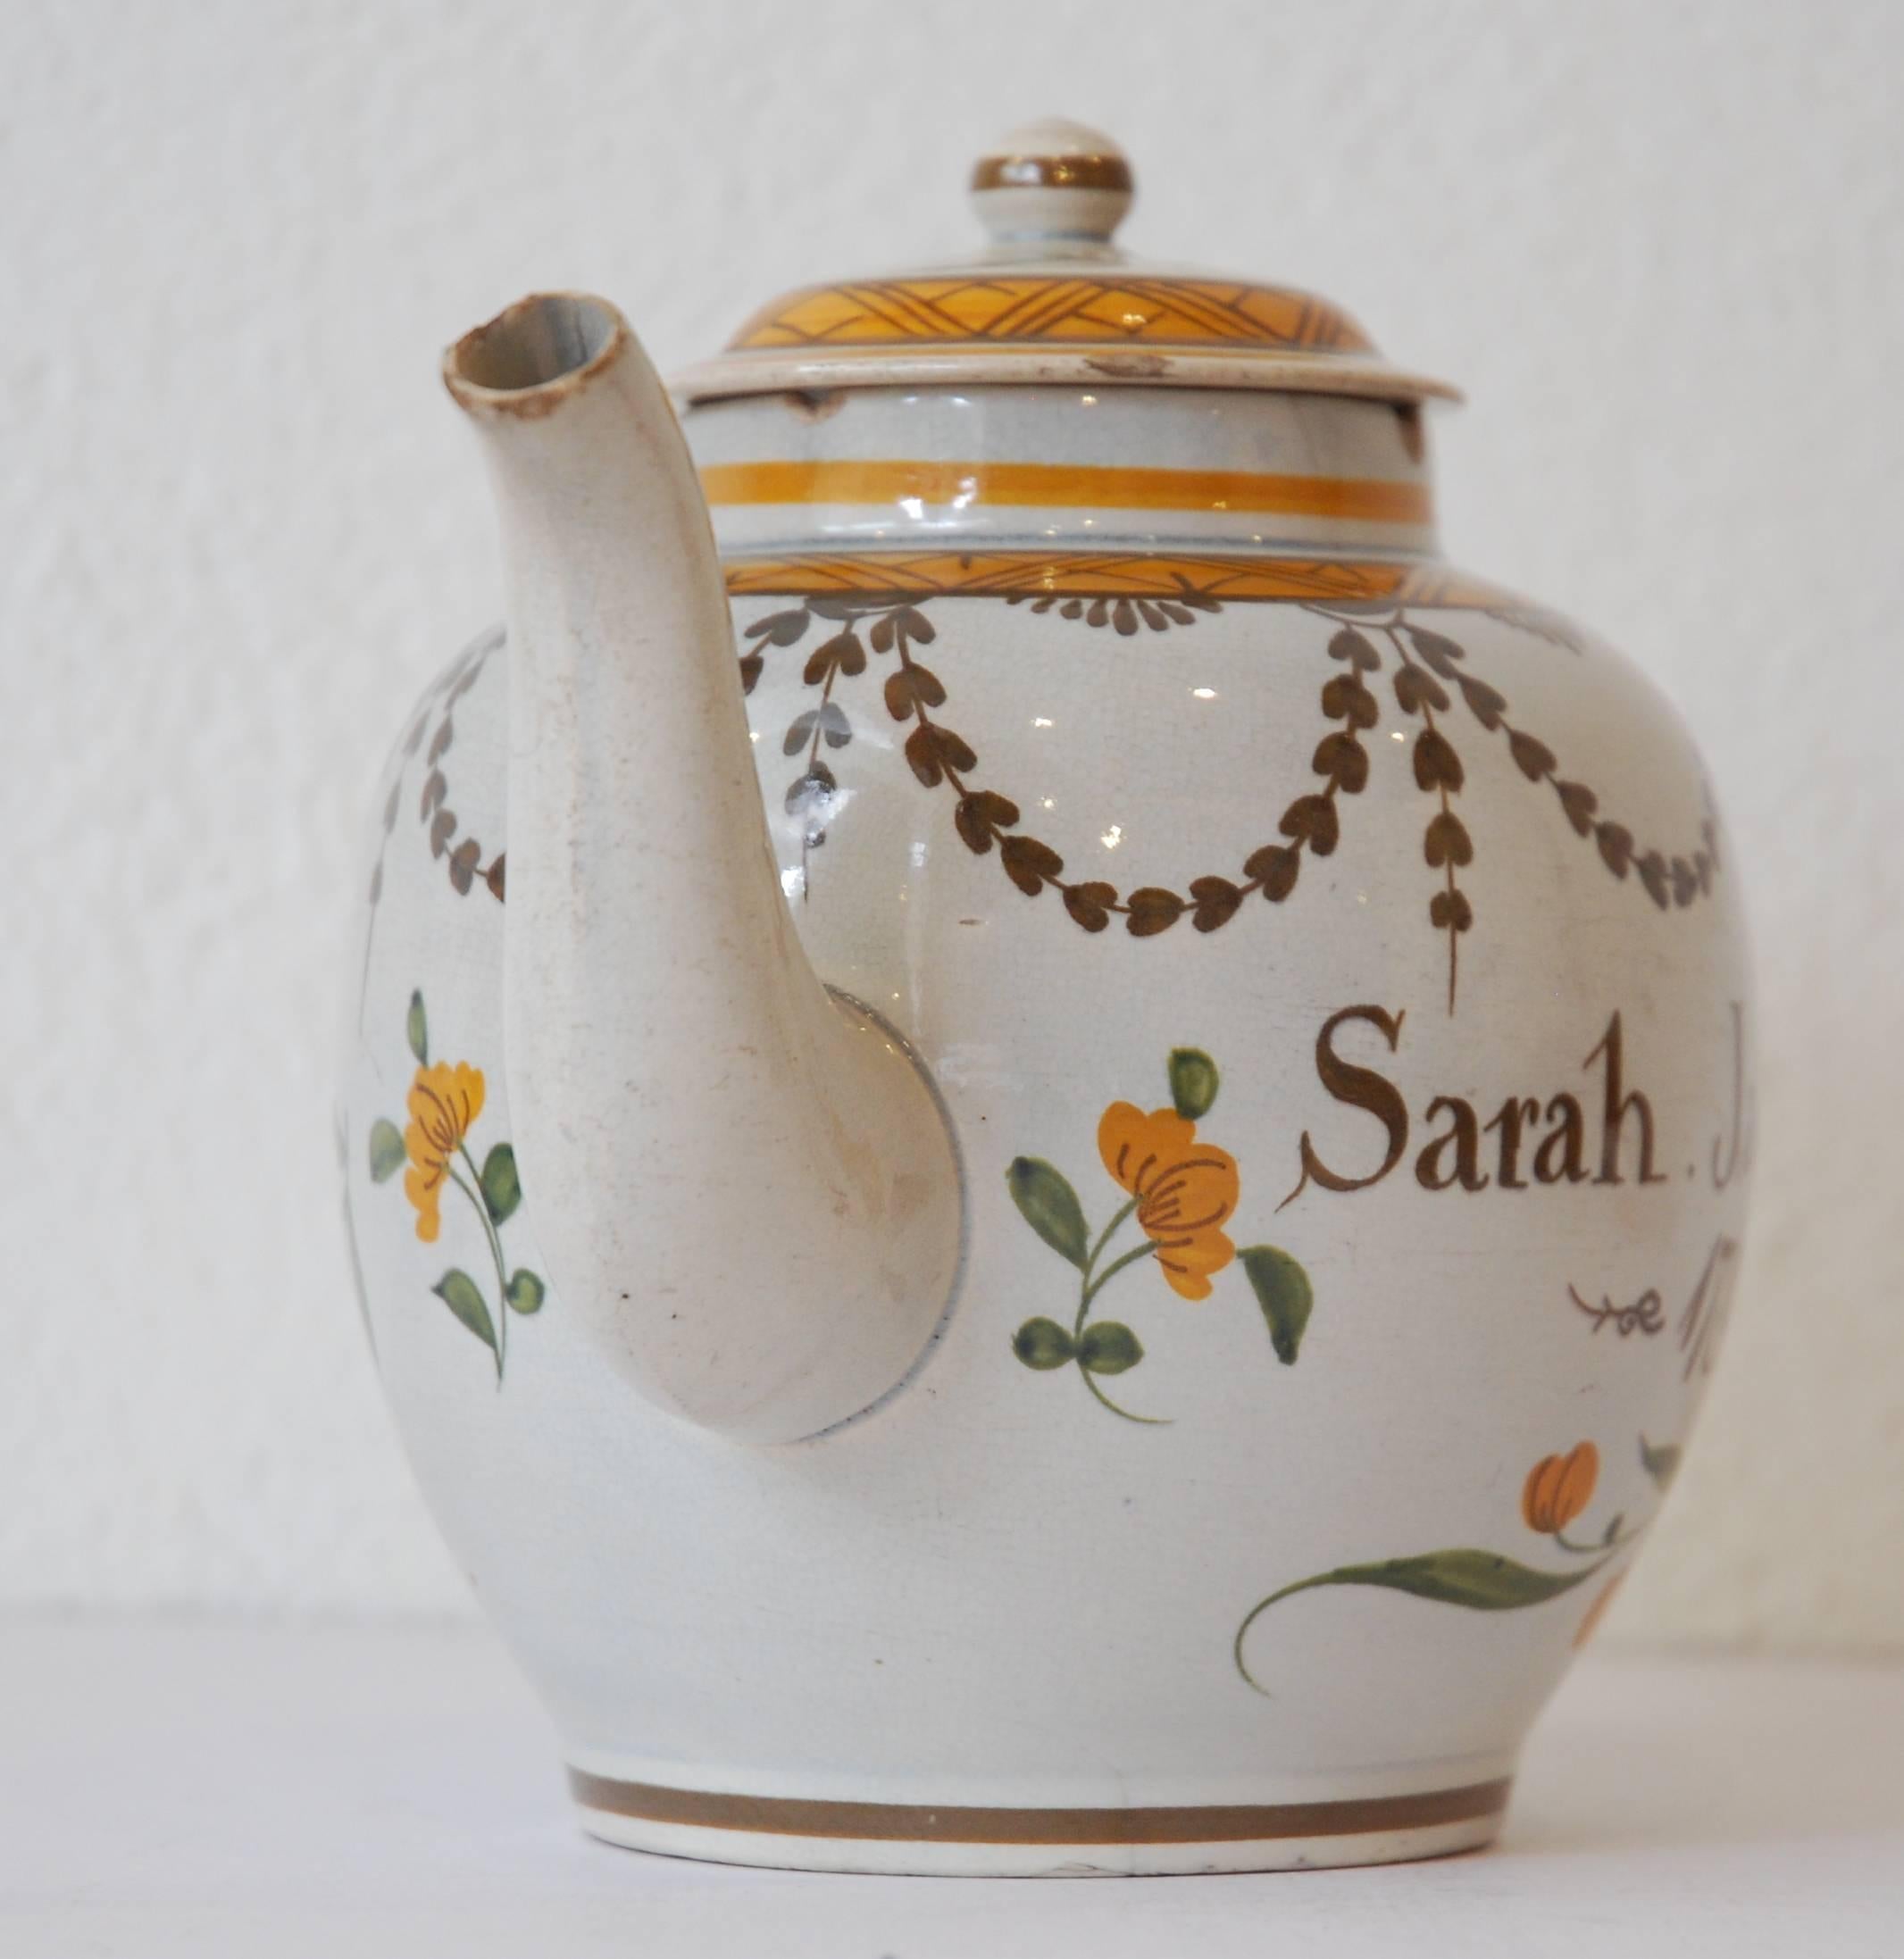 A documentary teapot, in pearl ware with Pratt ware colors under glaze. Dated and inscribed for Sarah Jackson. Attributed to the Swinton Pottery.